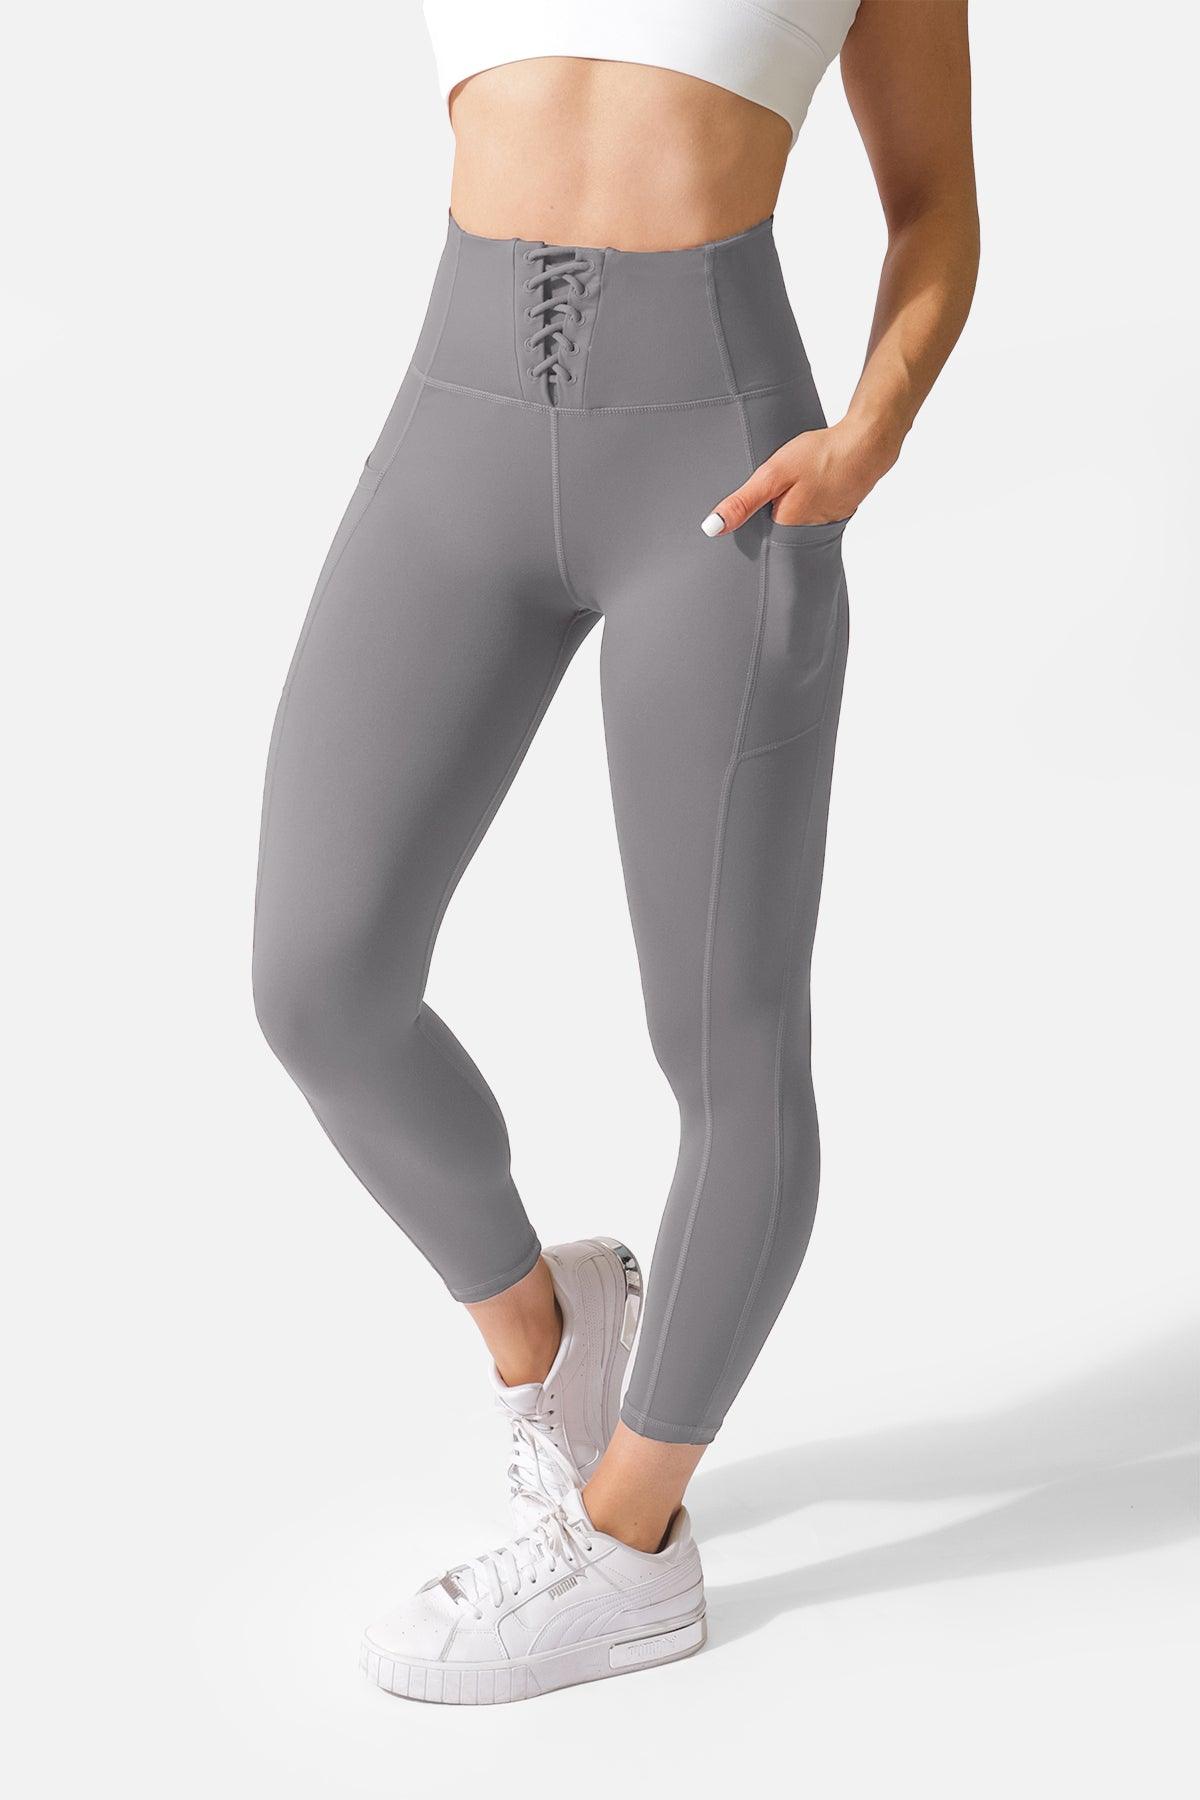 Joy Lab Grey Side Pocket Pull On Activewear Leggings Women's Size Large L -  $15 - From Taylor